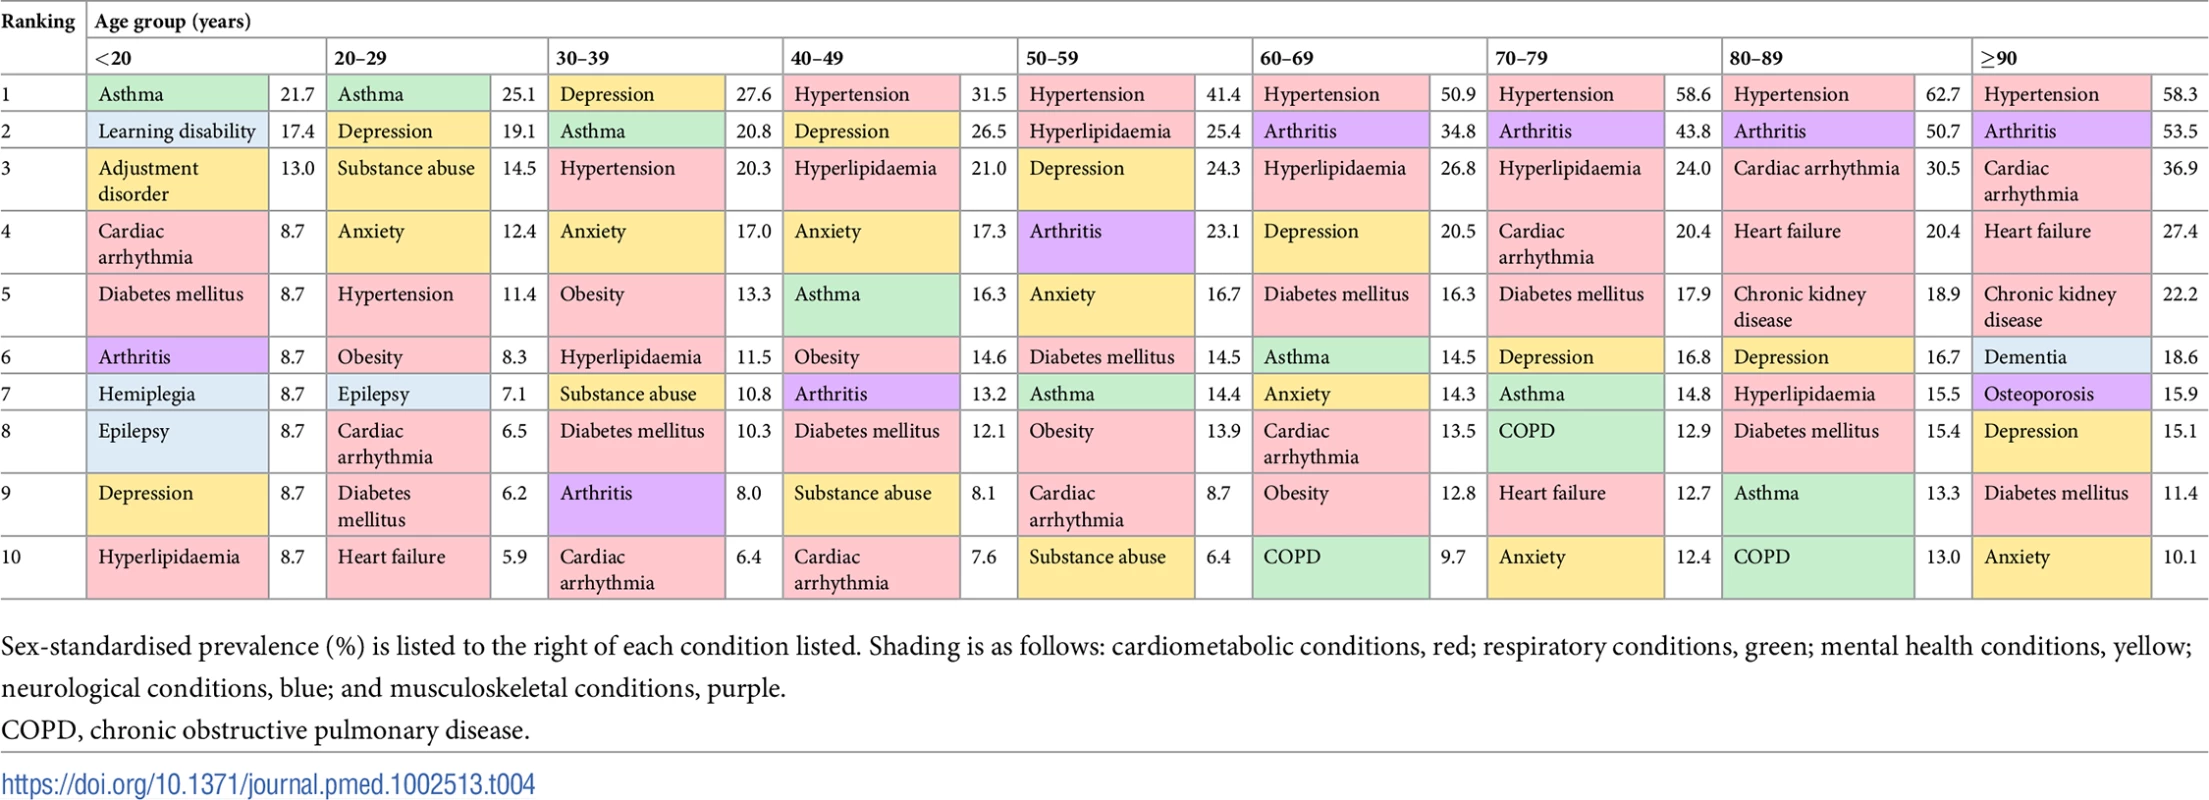 Age-specific ranking of the top 10 most prevalent comorbidities.